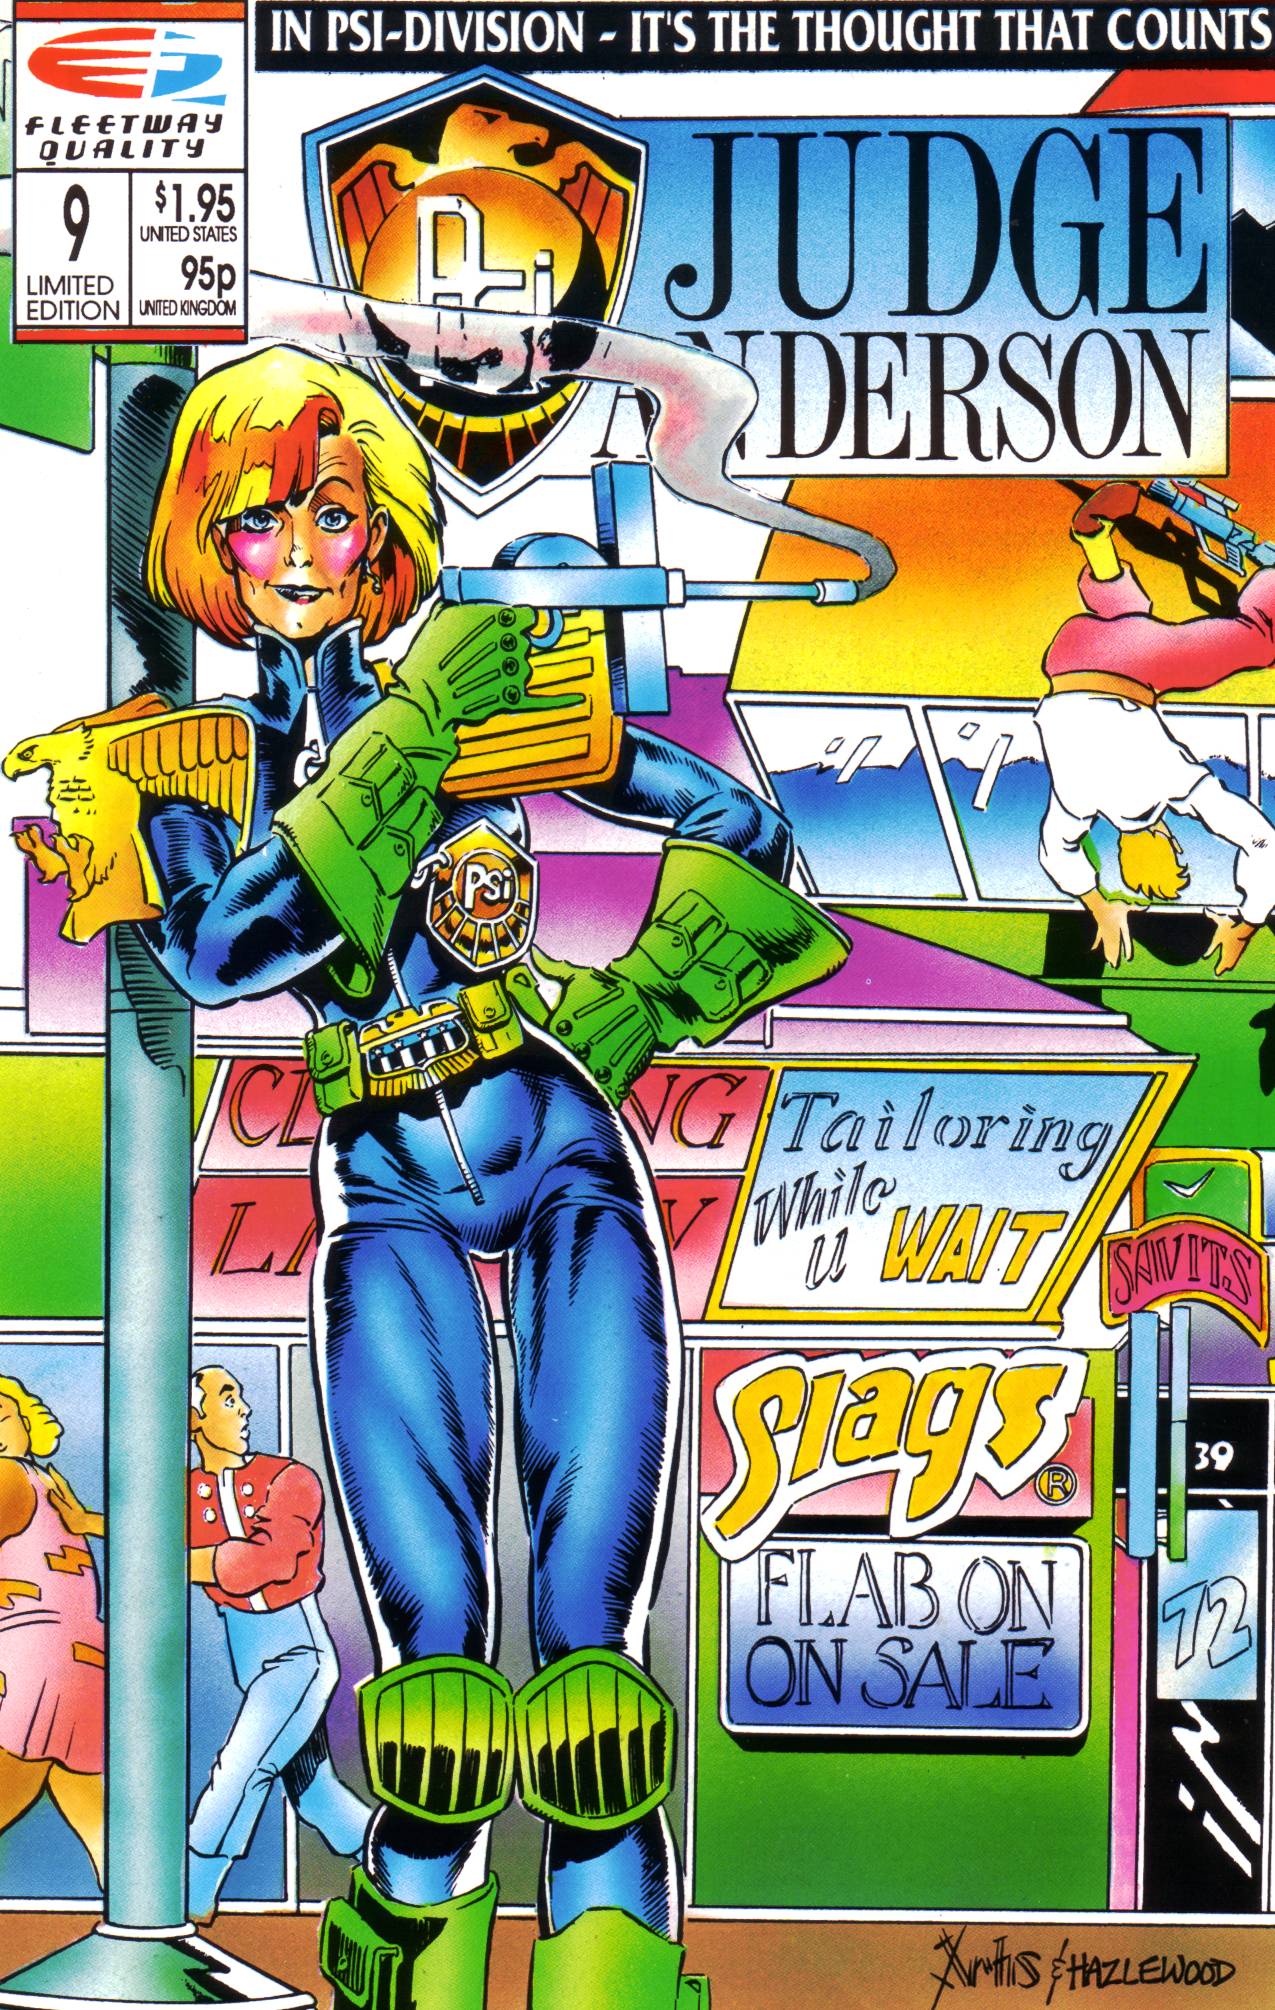 Read online Psi-Judge Anderson comic -  Issue #9 - 1